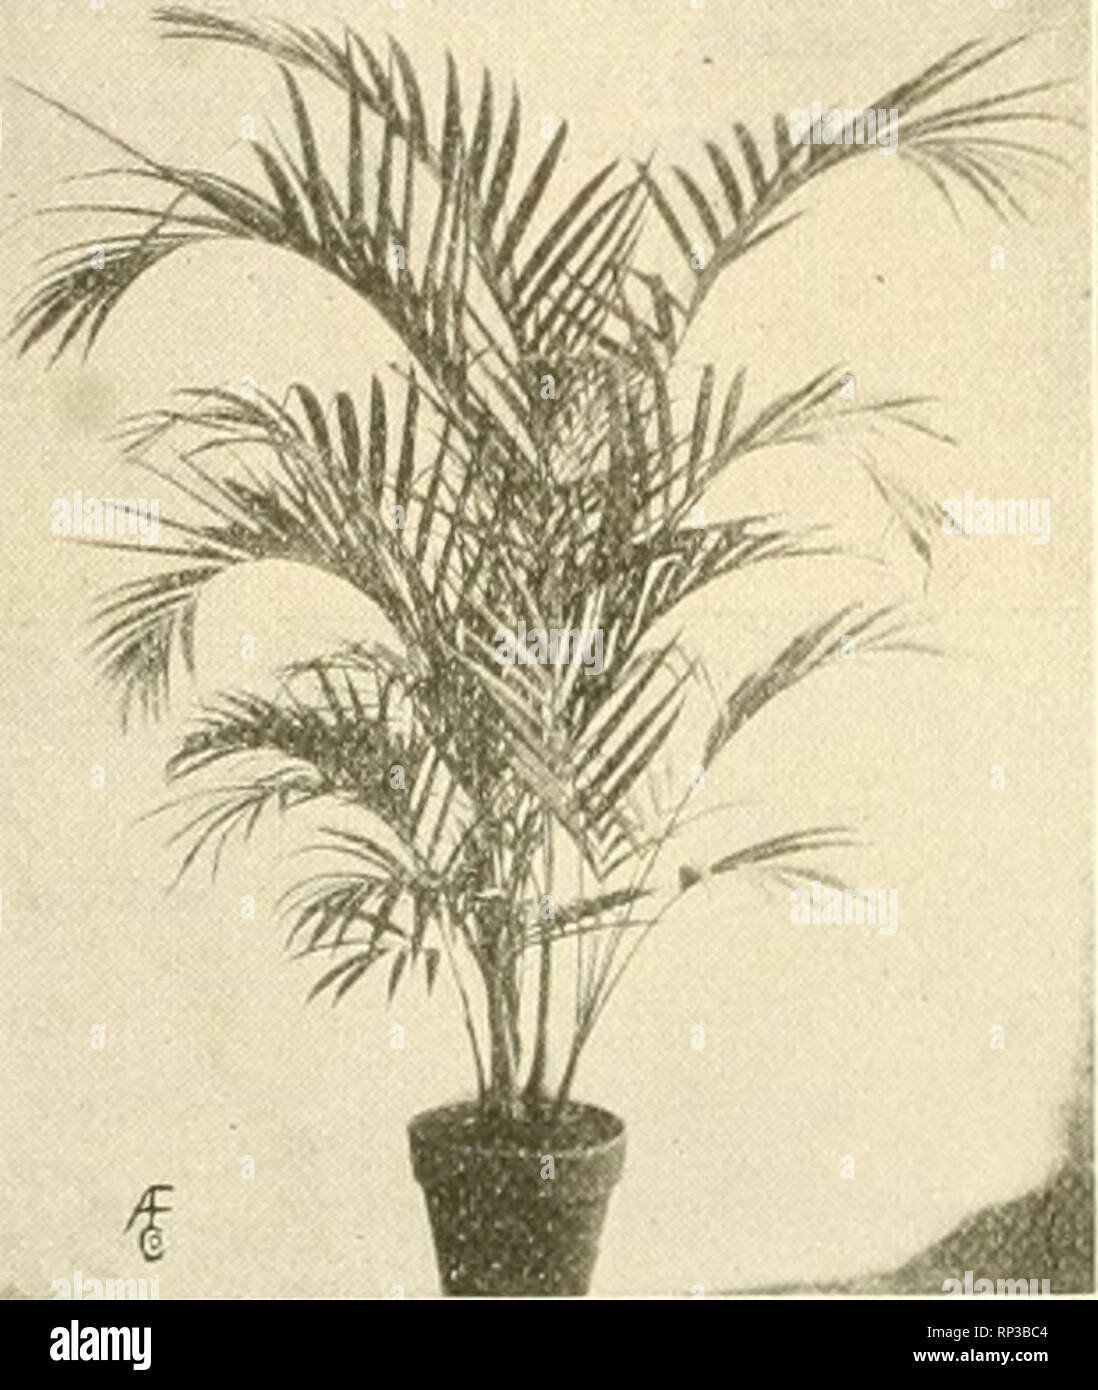 . The American florist : a weekly journal for the trade. Floriculture; Florists. Araucaria Excelsa, 4-iii., 60c each; |6 per doz. Asparagus Sprengeri, 4-in., $1.50 per doz.; »I0 per IW..; .$H0 per lOOO; 600 at lOlO rate; baskets, $1. $1.50 and $2 each. Asparagus Plumosus, 2-in., $3 per 100; b-in. $1 per doz.; $6 per 100. Asparagus scandens and Deflexus, 3-in., $10 per llO. Aspidistra Variegated, 16c per leaf. Green, be per leaf. Crotons, 3-in., $10 per 100; 4-m., 25c each; $3 per doz,; 7-in., (4 inpot) 75c and $1 each. Dracaena Indivlsa, 2 inch, $B per 100; $^5 per lUUU; 8-inch, 'ZV2 to 3 ft.  Stock Photo